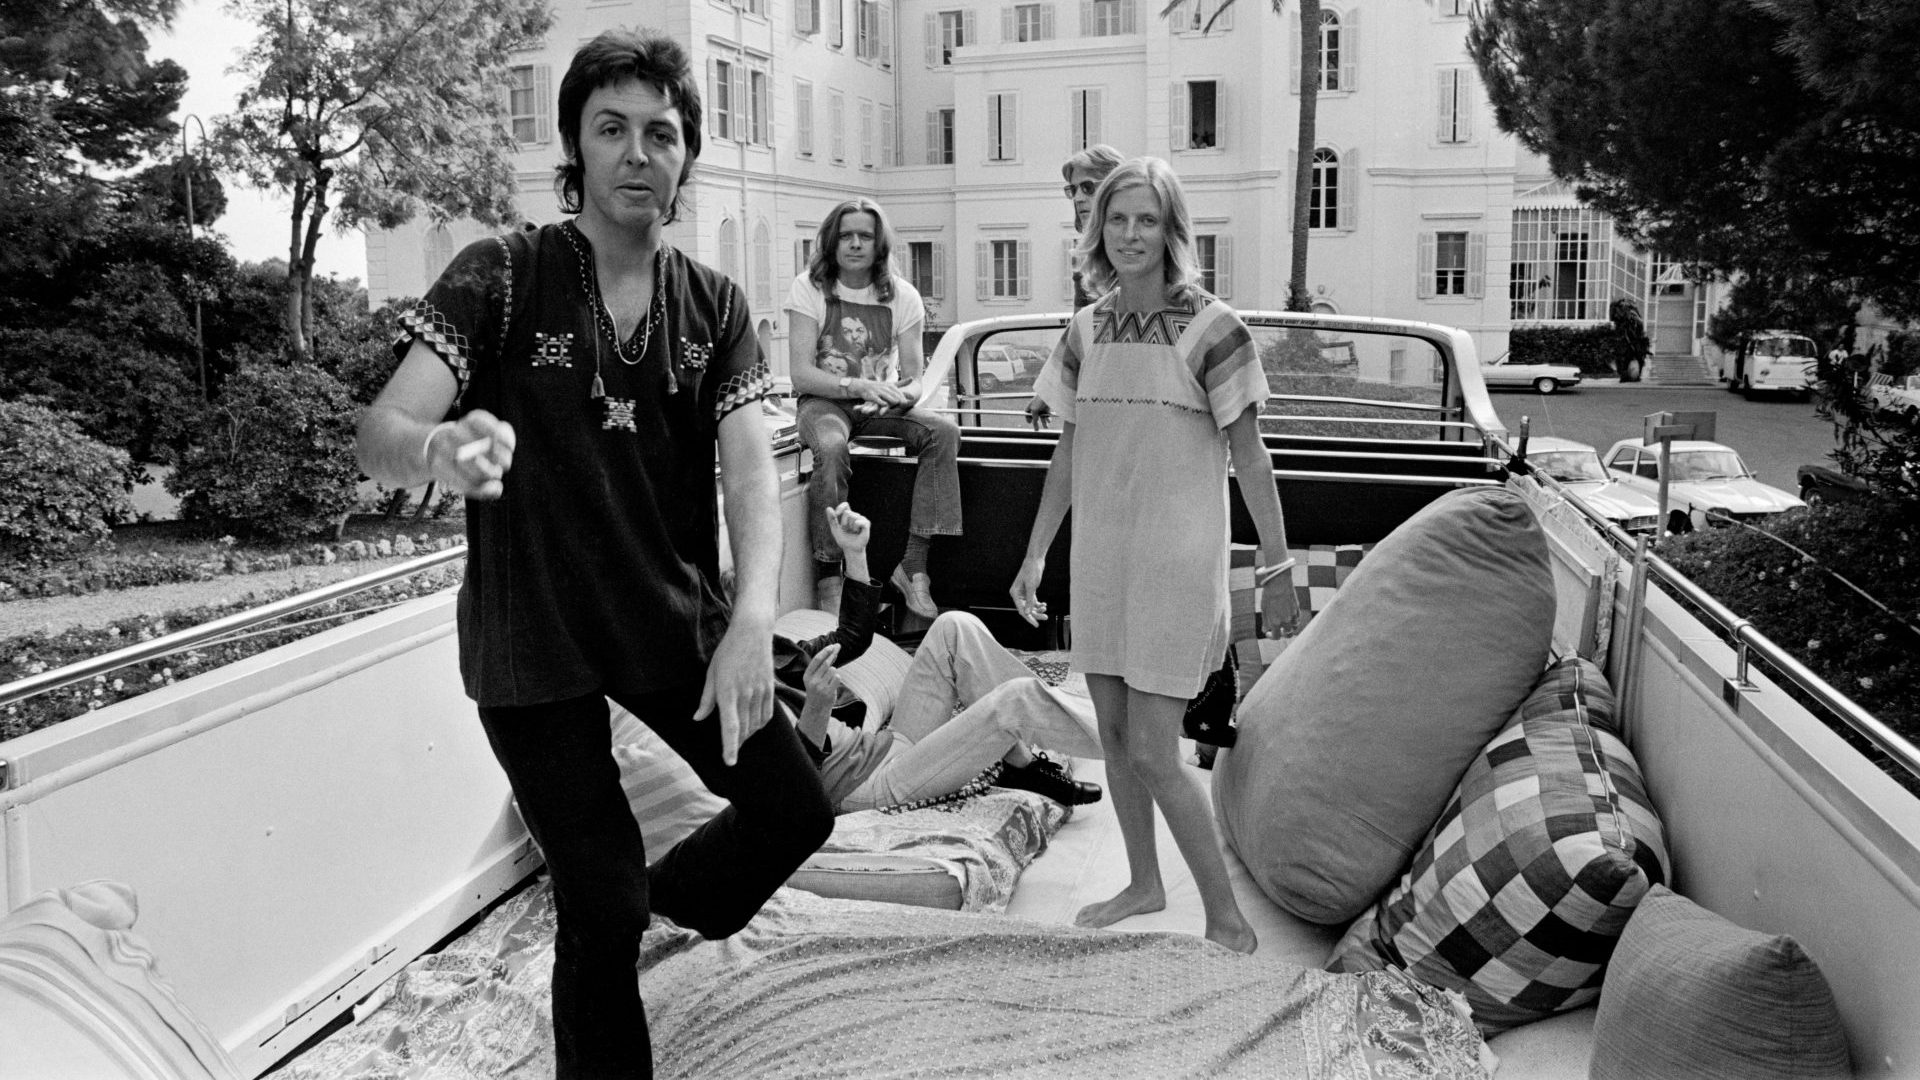 Paul and Linda on the top deck of the bus with Henry McCullough 
in Juan-les-Pins, July 12 (Photo: Reg 
Lancaster/Daily Express/Hulton/Getty)